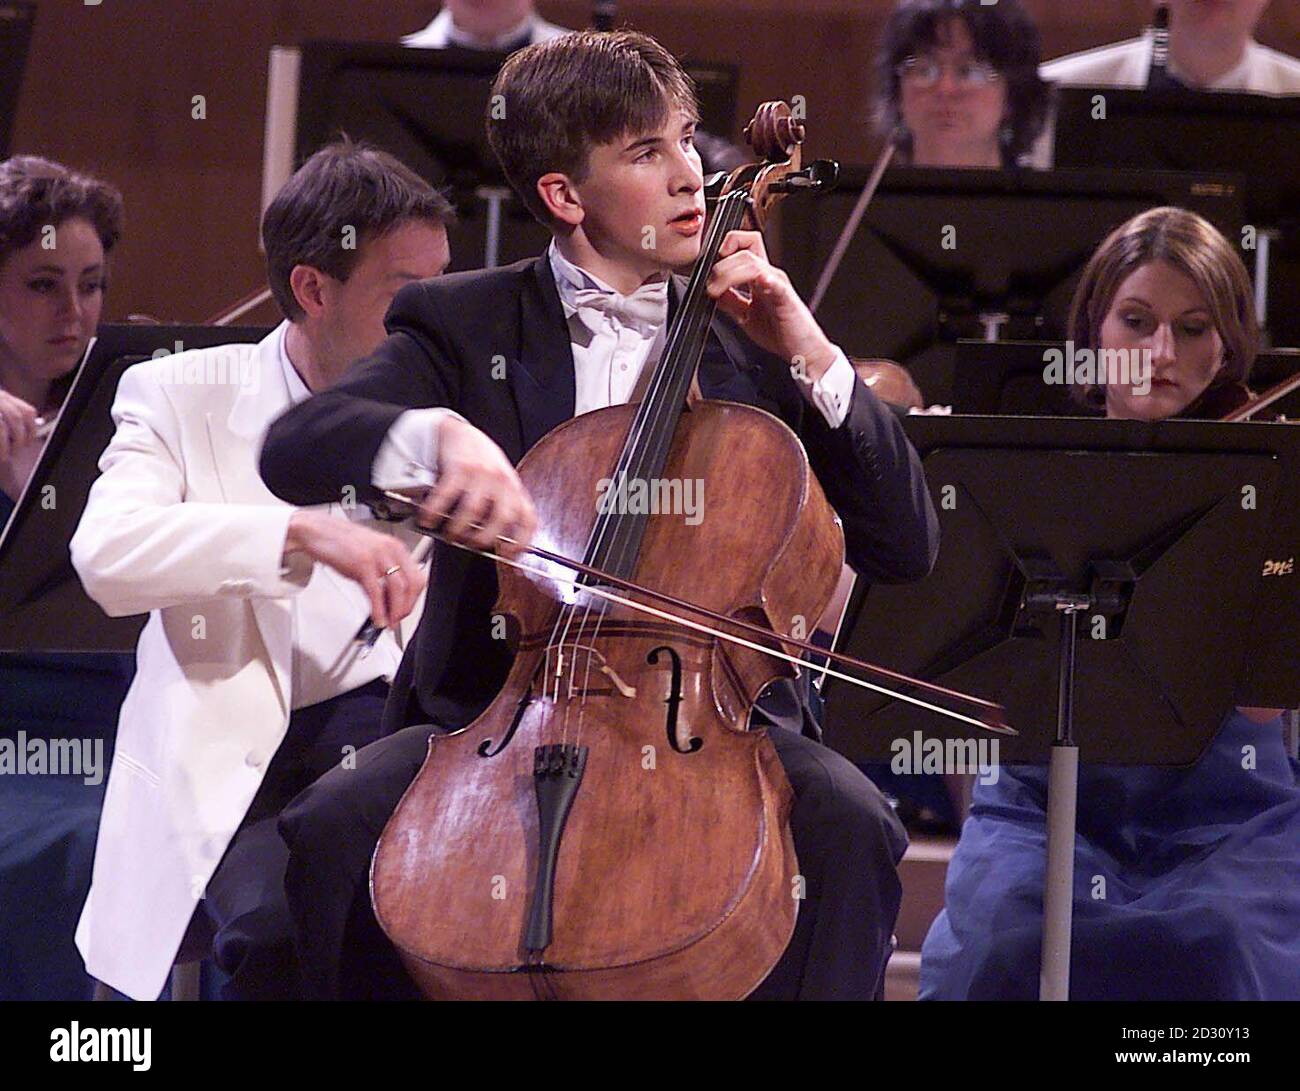 18 year old Guy Johnston plays his Cello on the way to winning the BBC Young Musician of the Year 2000 competition, at the Bridgewater Hall in Manchester. One of Guy's strings broke at the start of his performance but he managed to keep his composure. * ...changing the string and carrying on to win. Stock Photo